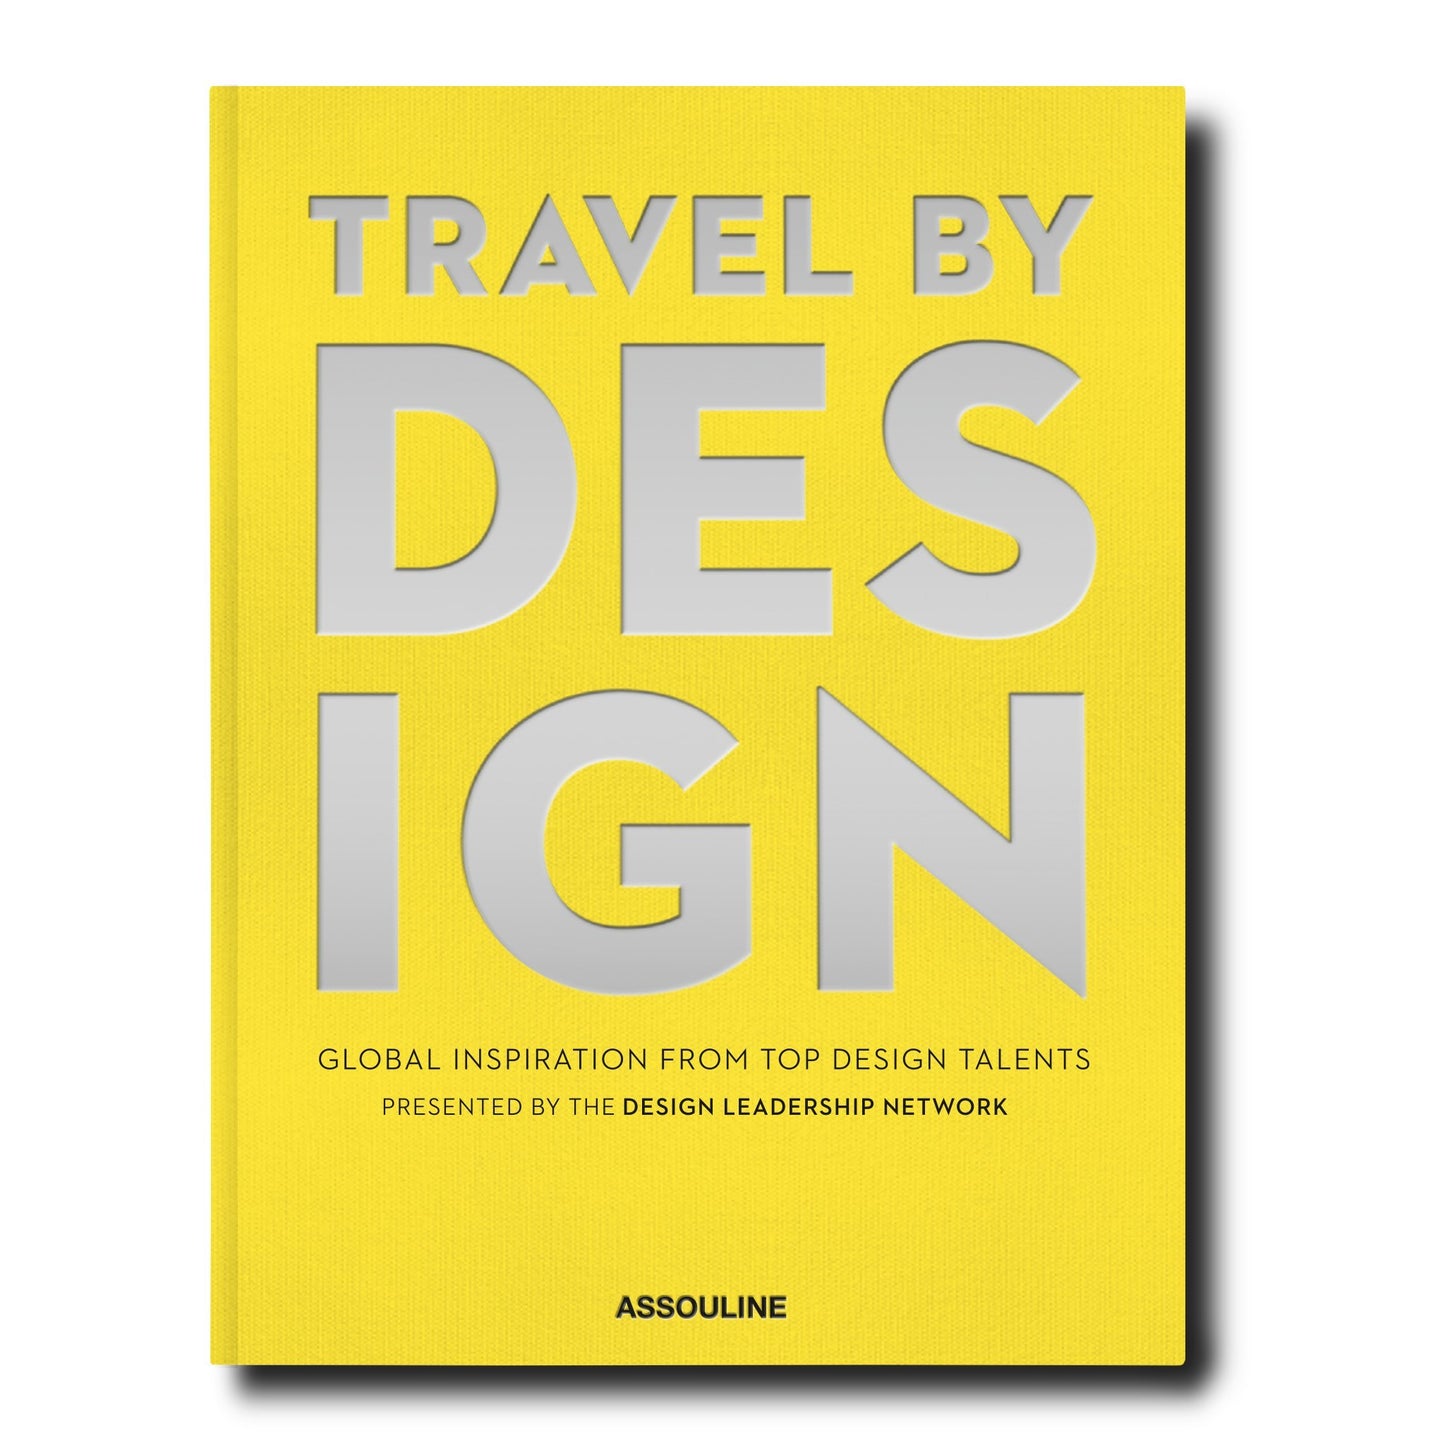 Book Travel by Design